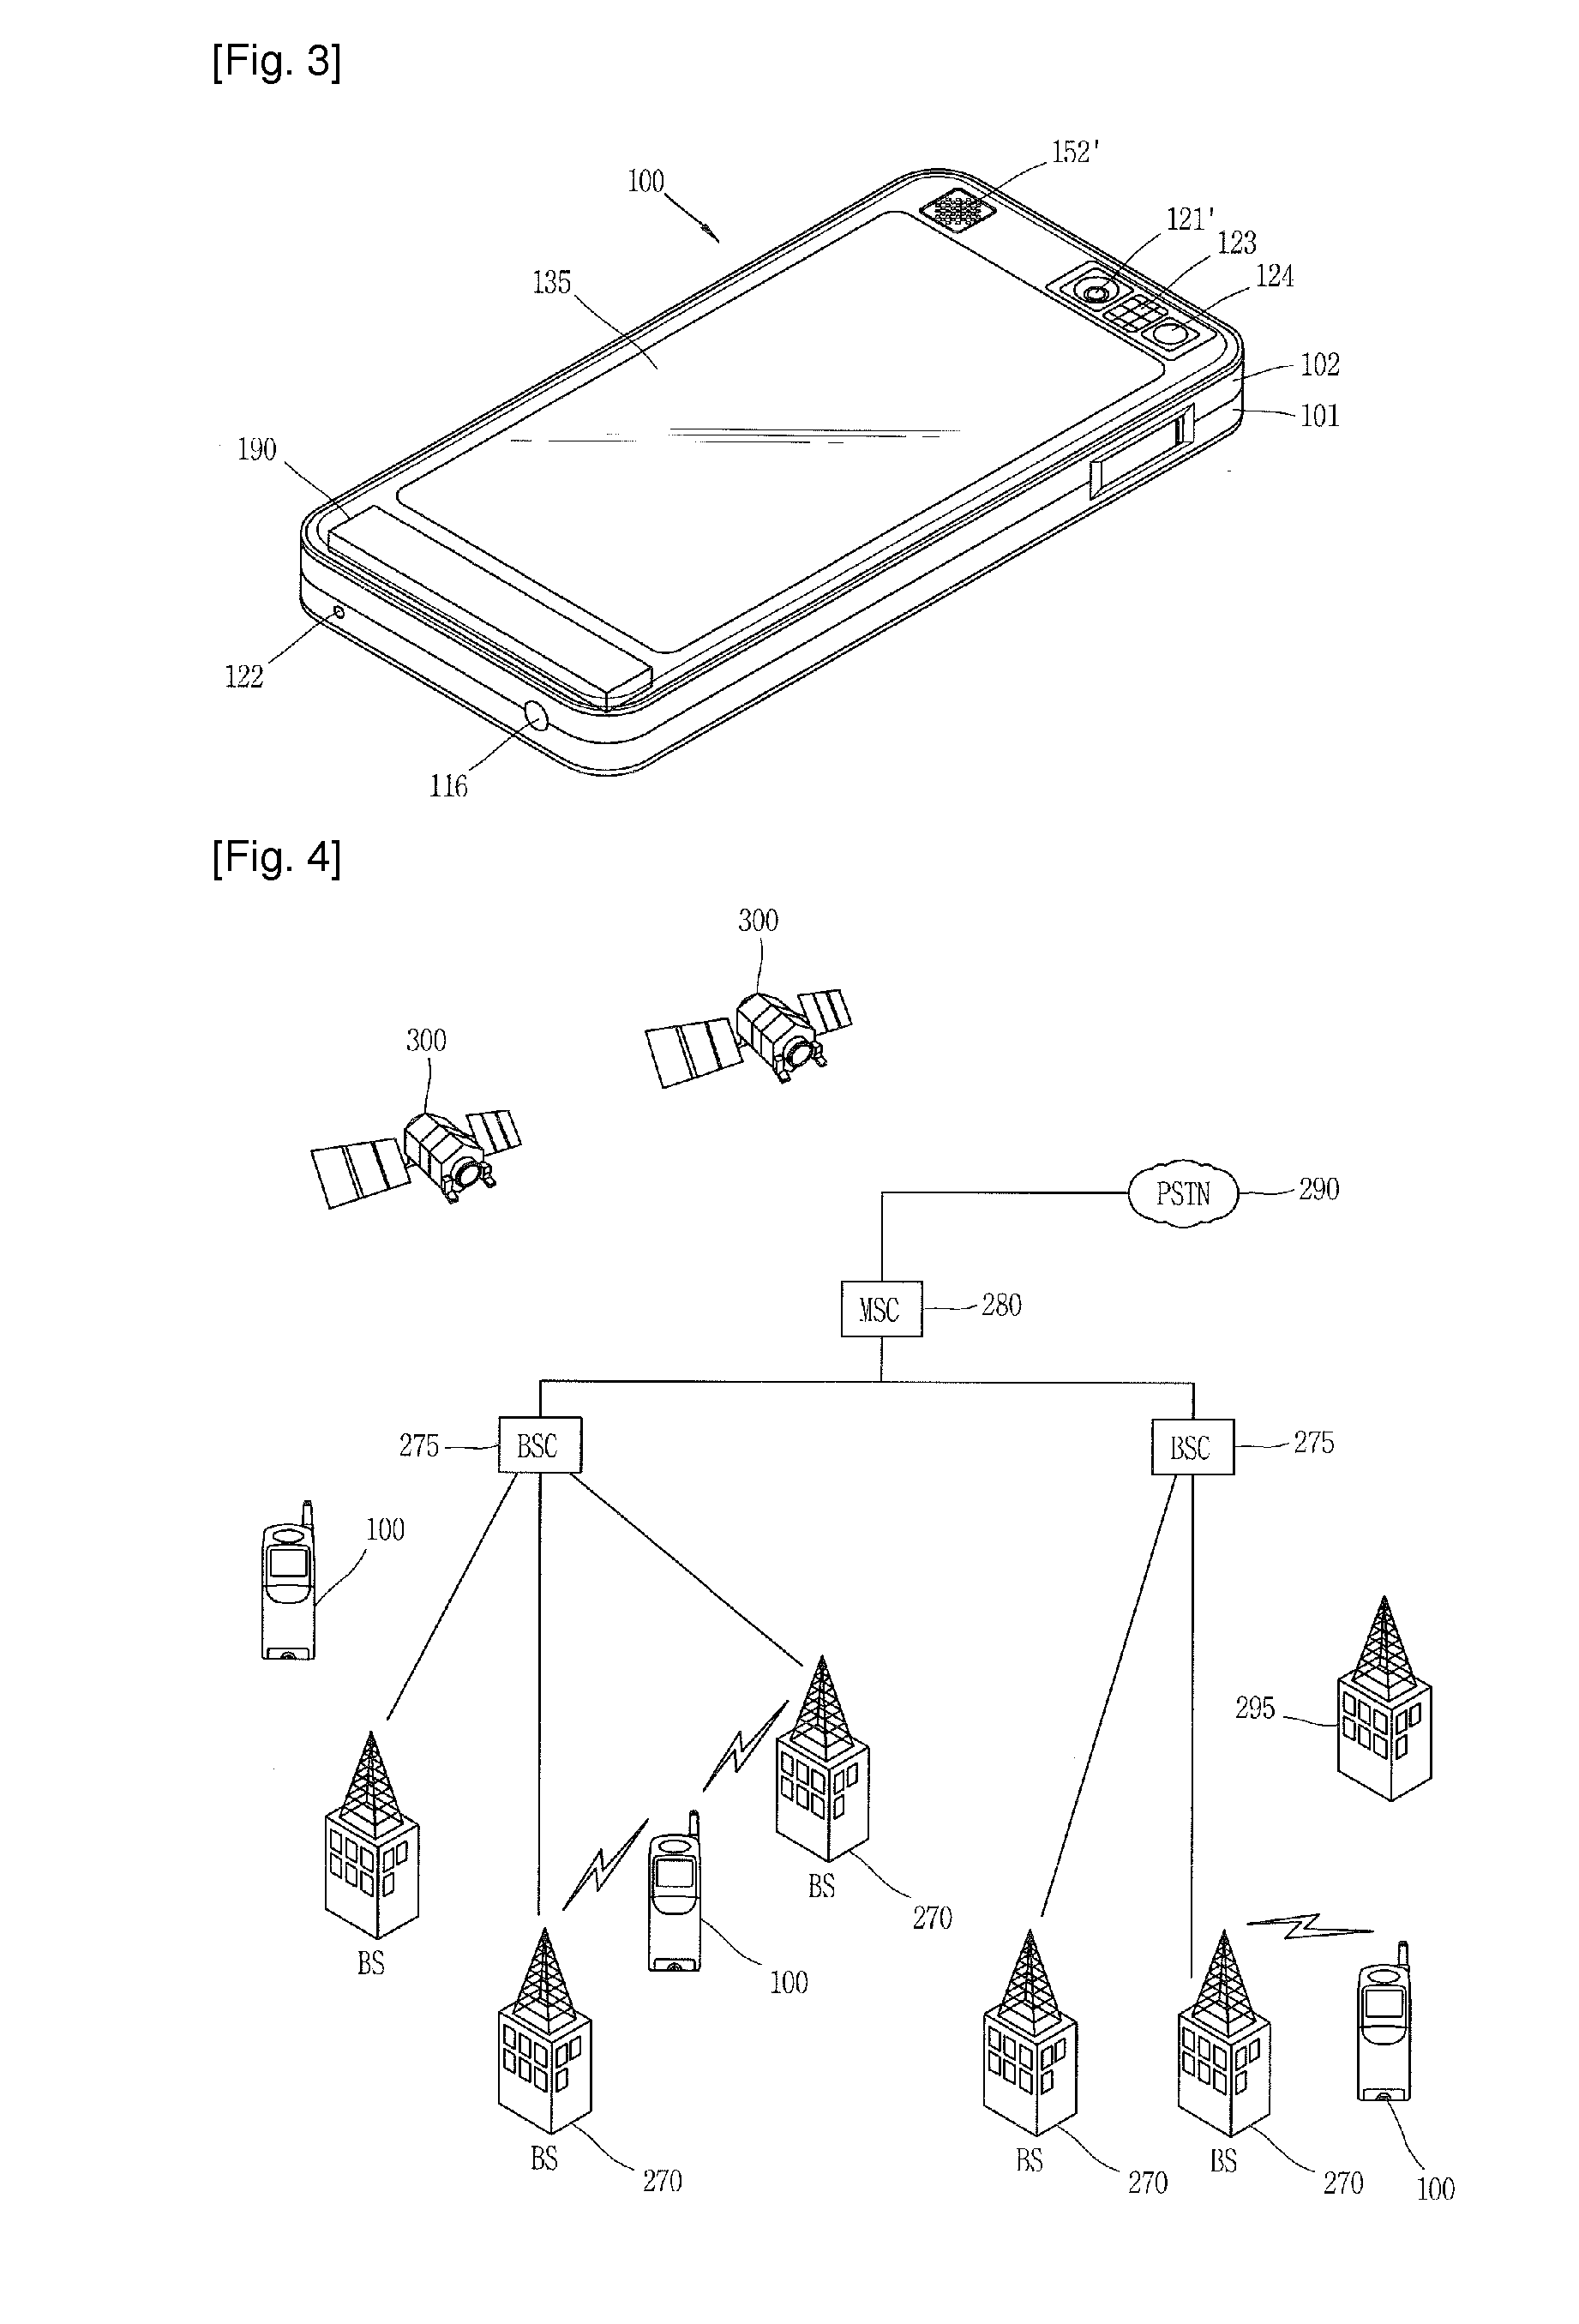 Mobile terminal, method of computing absolute coordinates of wireless ap by mobile terminal, and system of computing absolute coordinates of wireless ap using mobile terminal